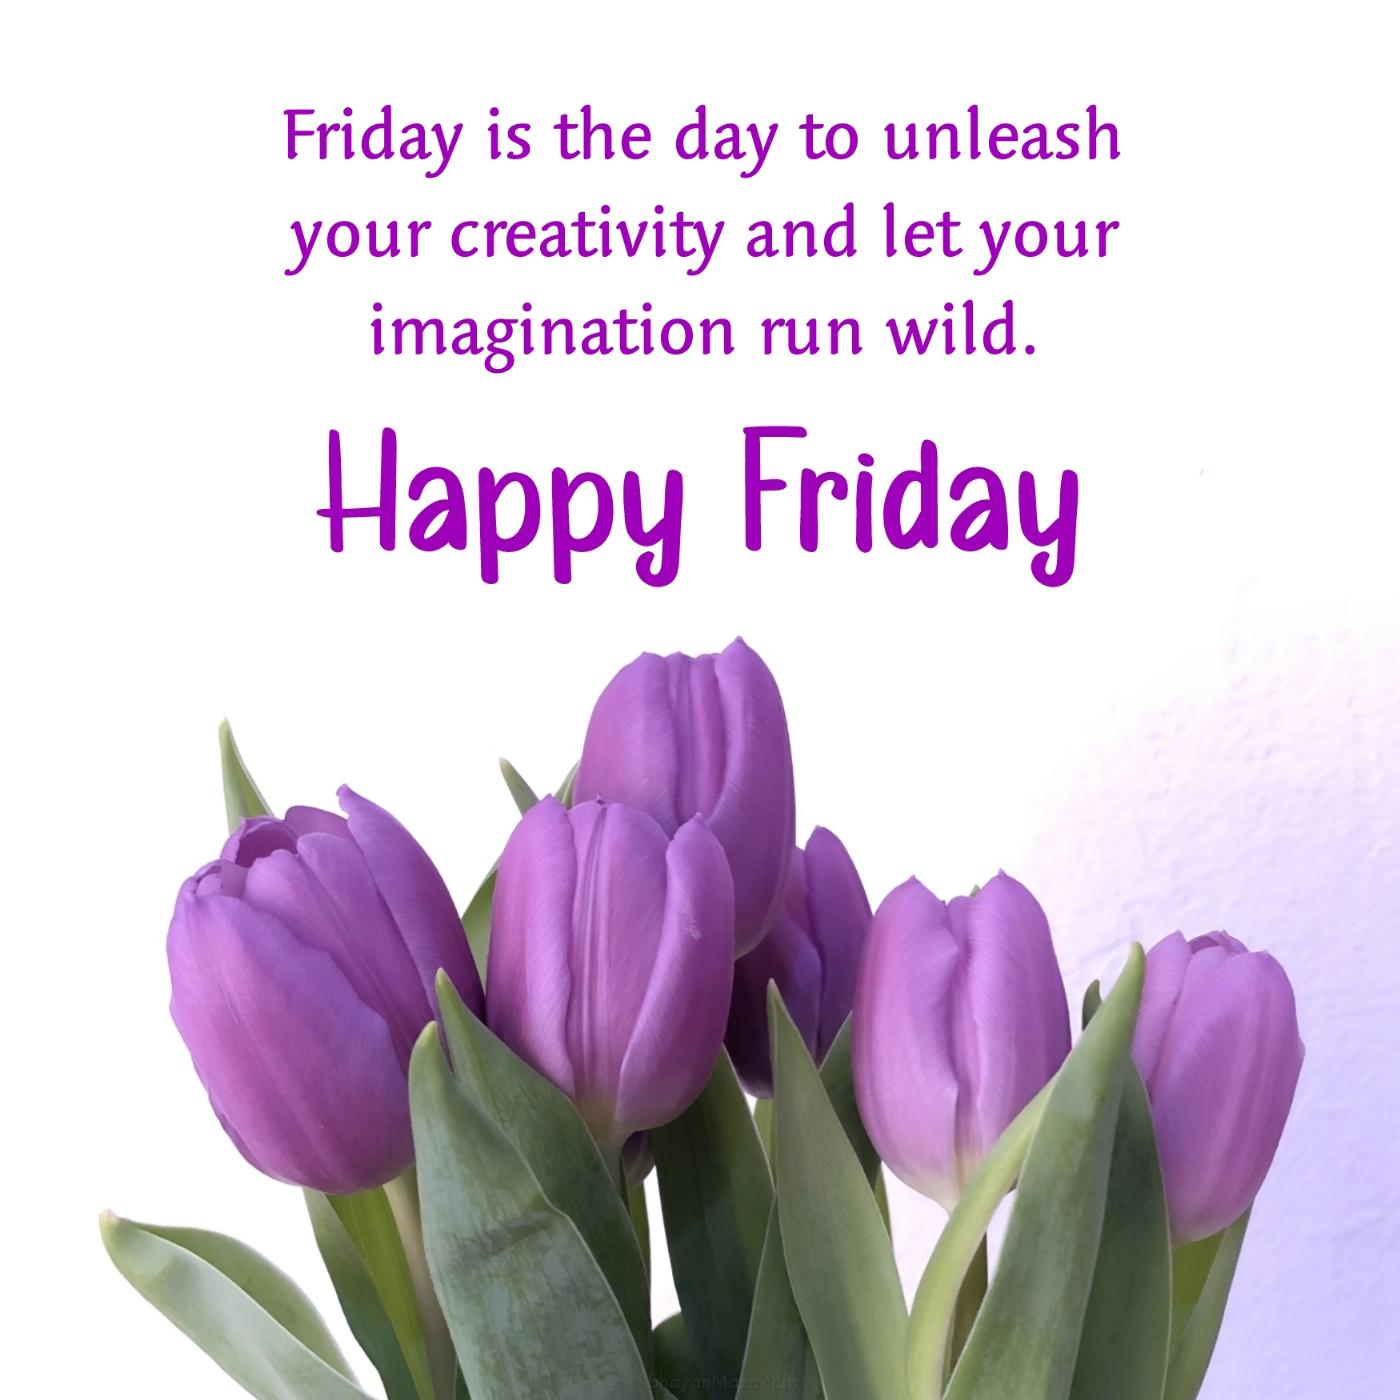 Friday is the day to unleash your creativity and let your imagination run wild